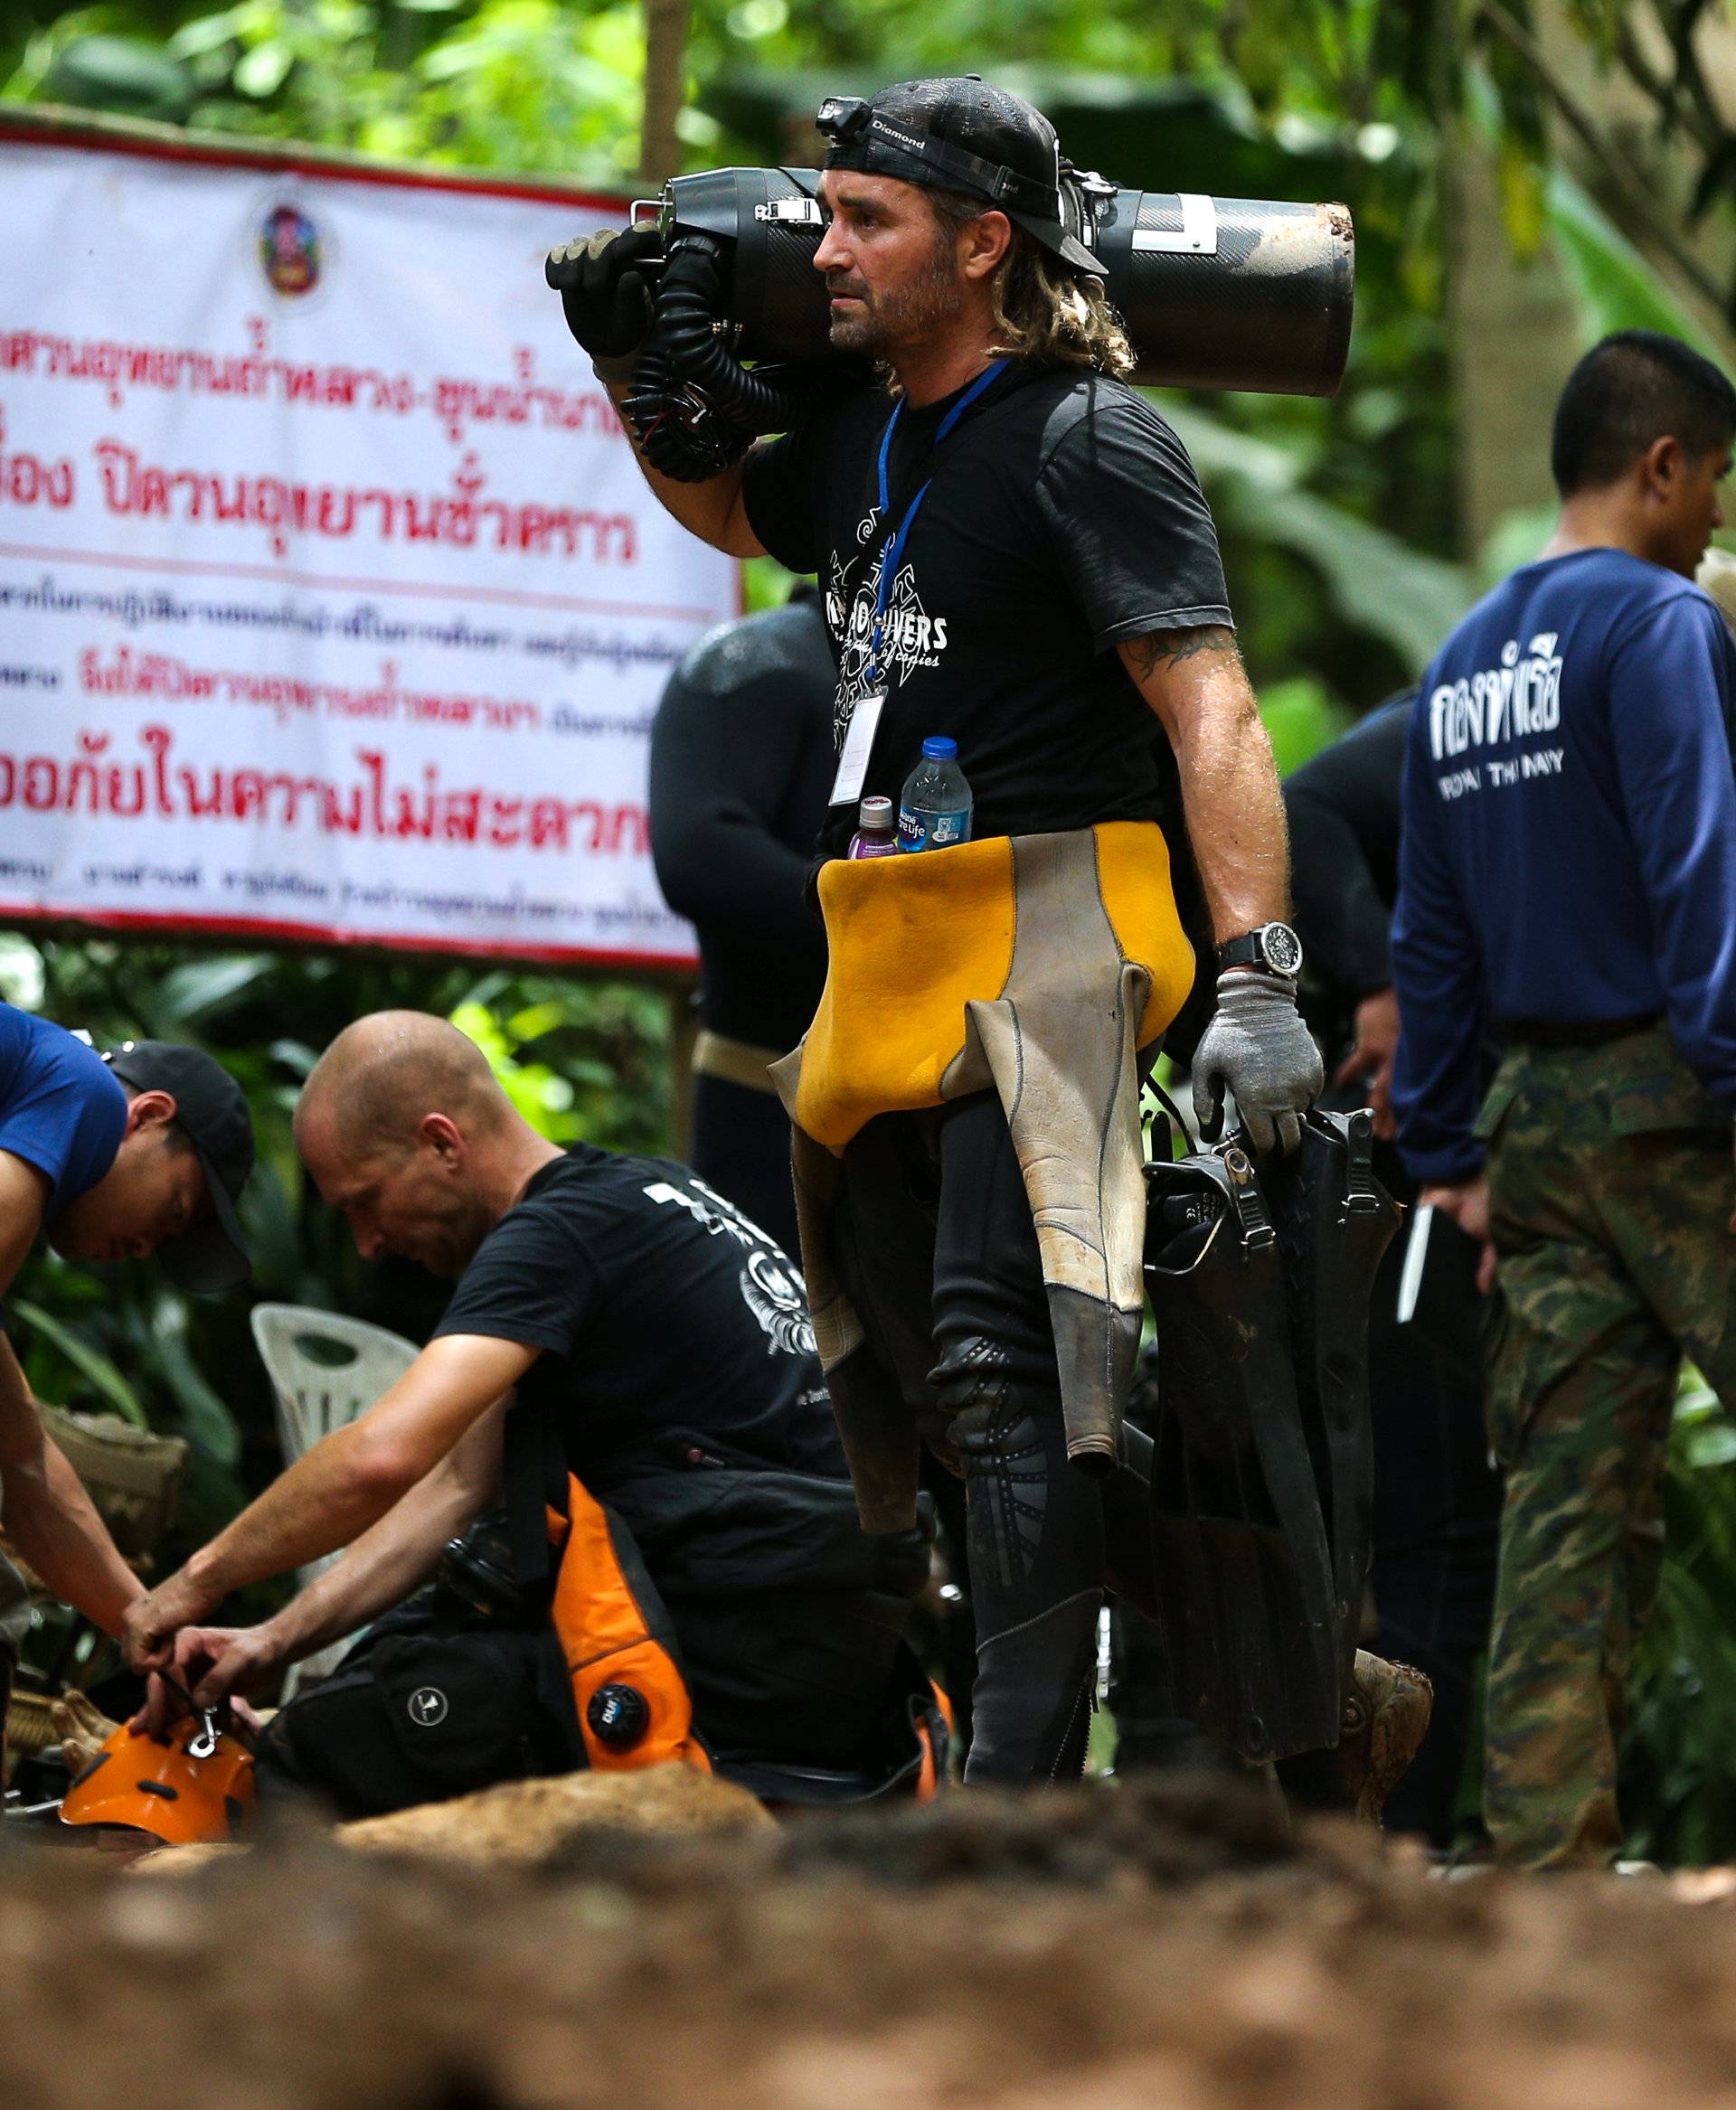 International divers carry equipments as they prepare to go in to Tham Luang cave complex, as members of an under-16 soccer team and their coach have been found alive according to local media in the northern province of Chiang Rai